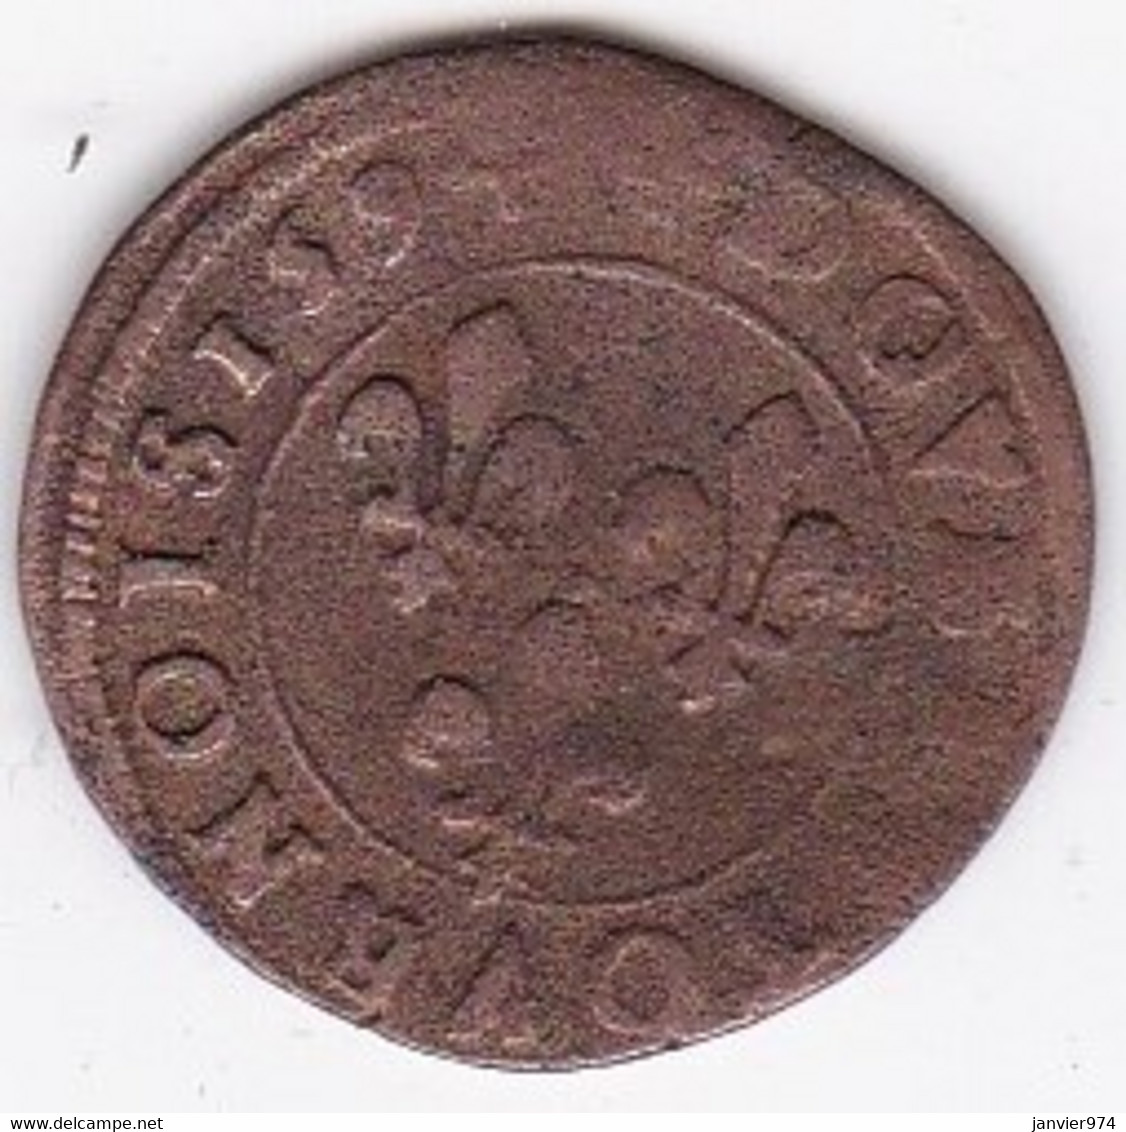 Double Tournois 1594 Clermont En Auvergne , Henri IV, CGKL 174 - 1589-1610 Henry IV The Great